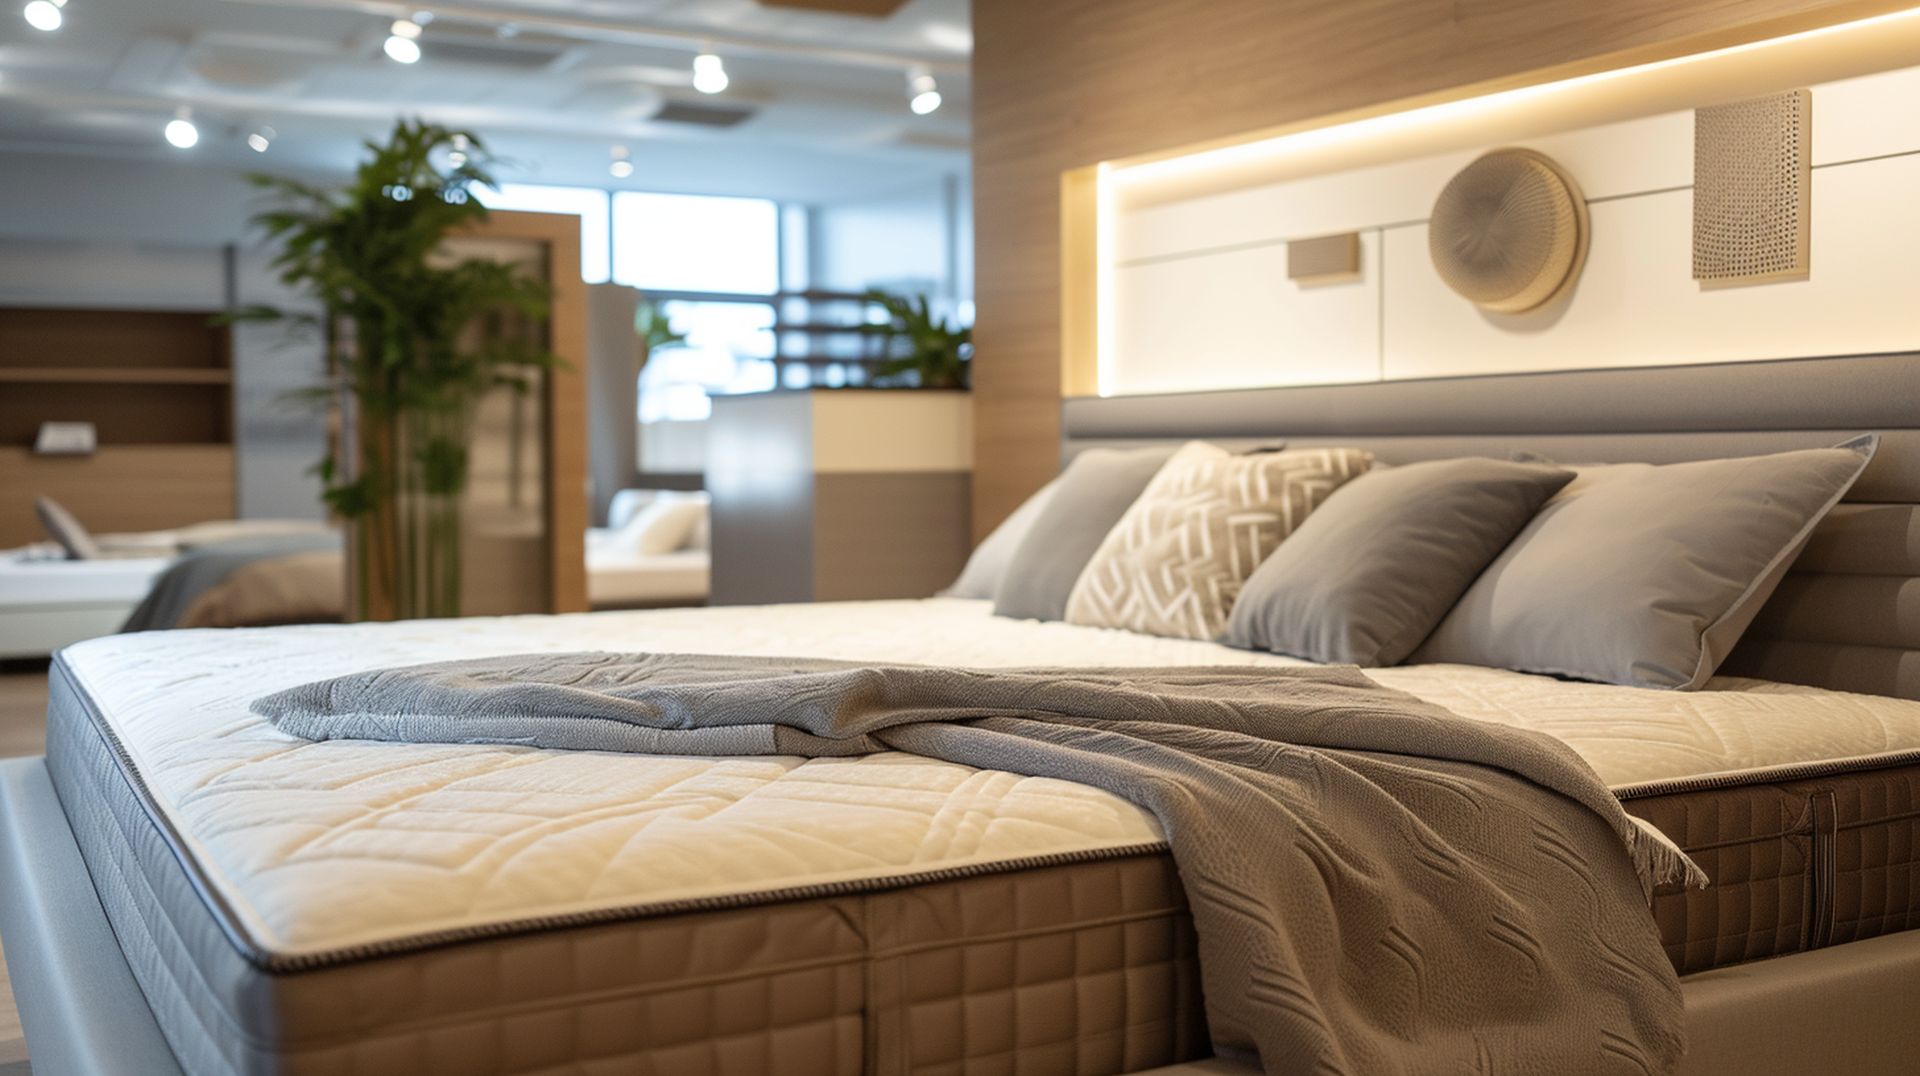 Local Hamden mattress stores have the best prices, sales, and deals if you're looking for a new mattress in Hamden